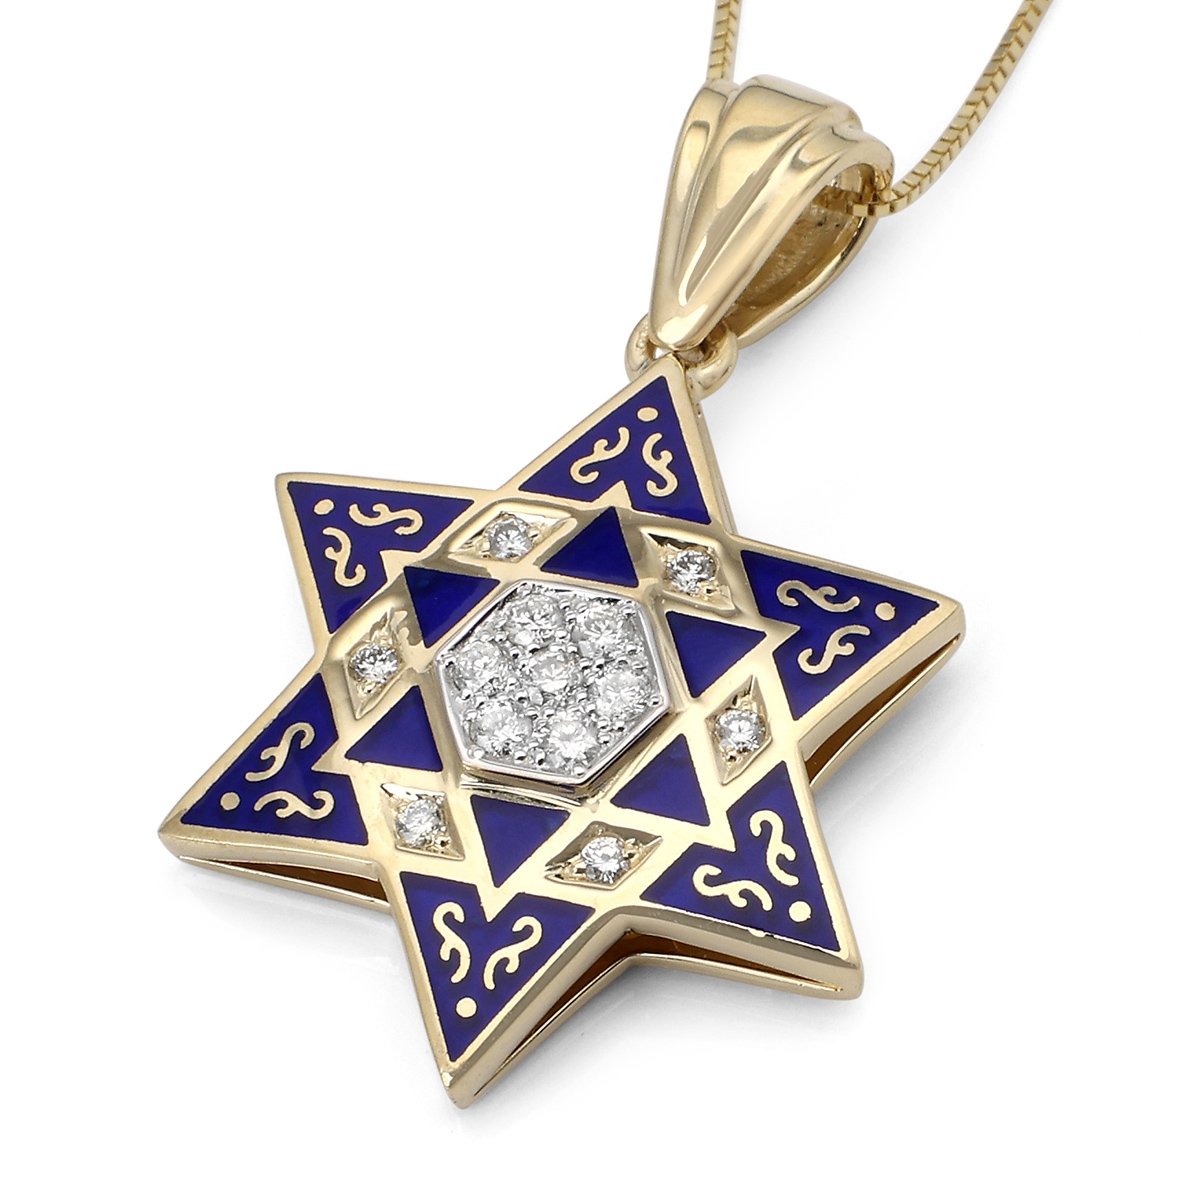 Star of David Jewelry: Our Top 15 Picks